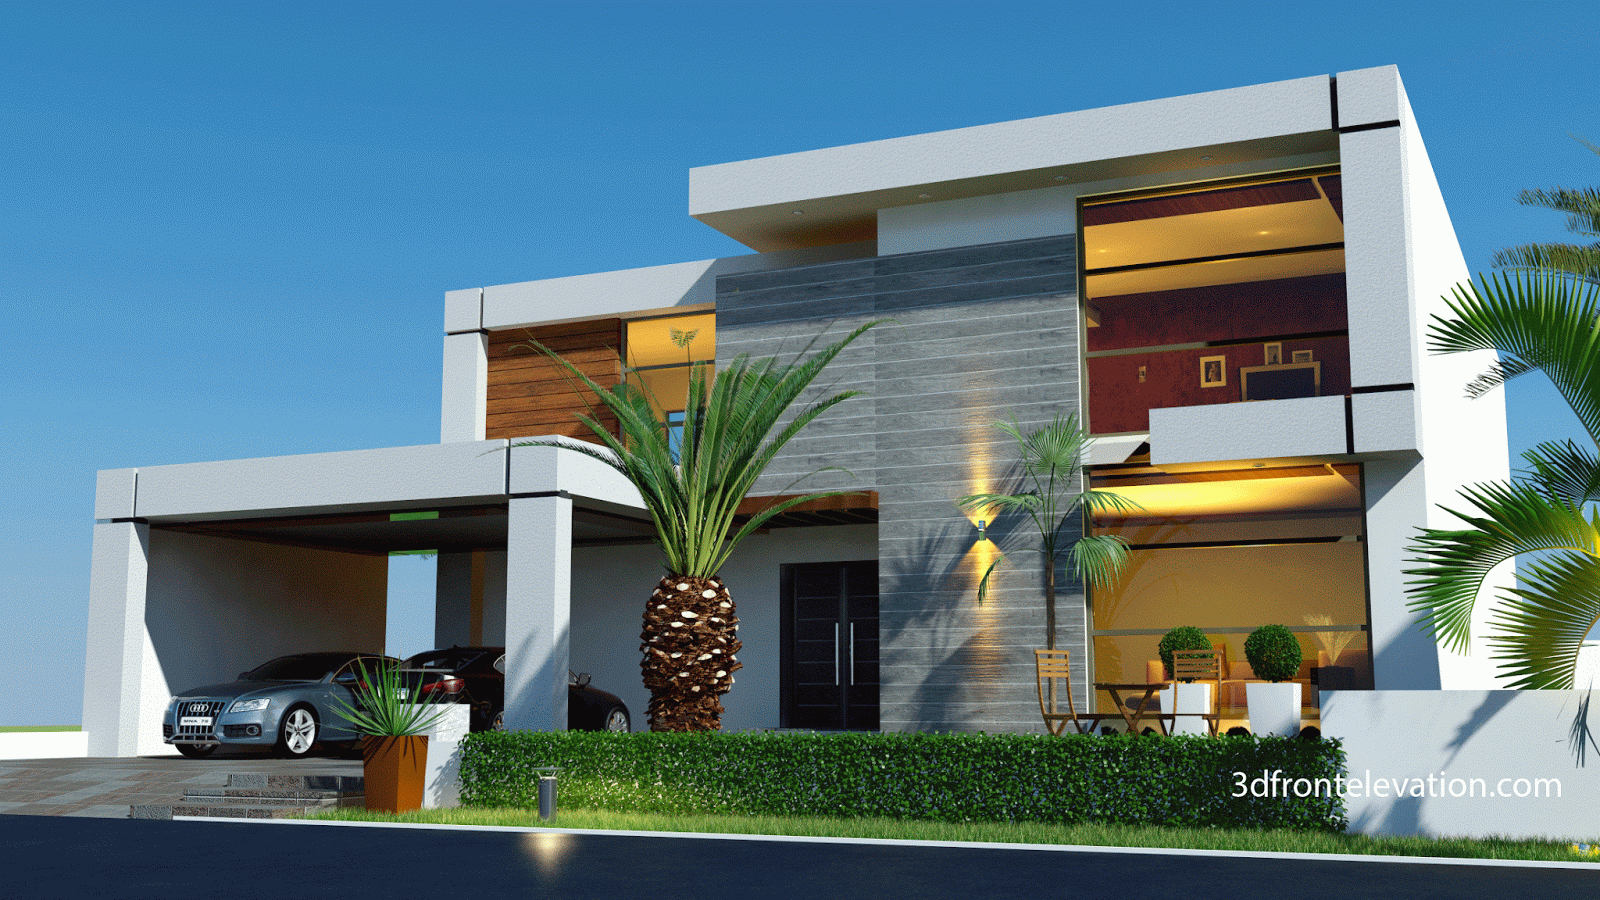 3D Front Elevation.com: Beautiful Contemporary House 